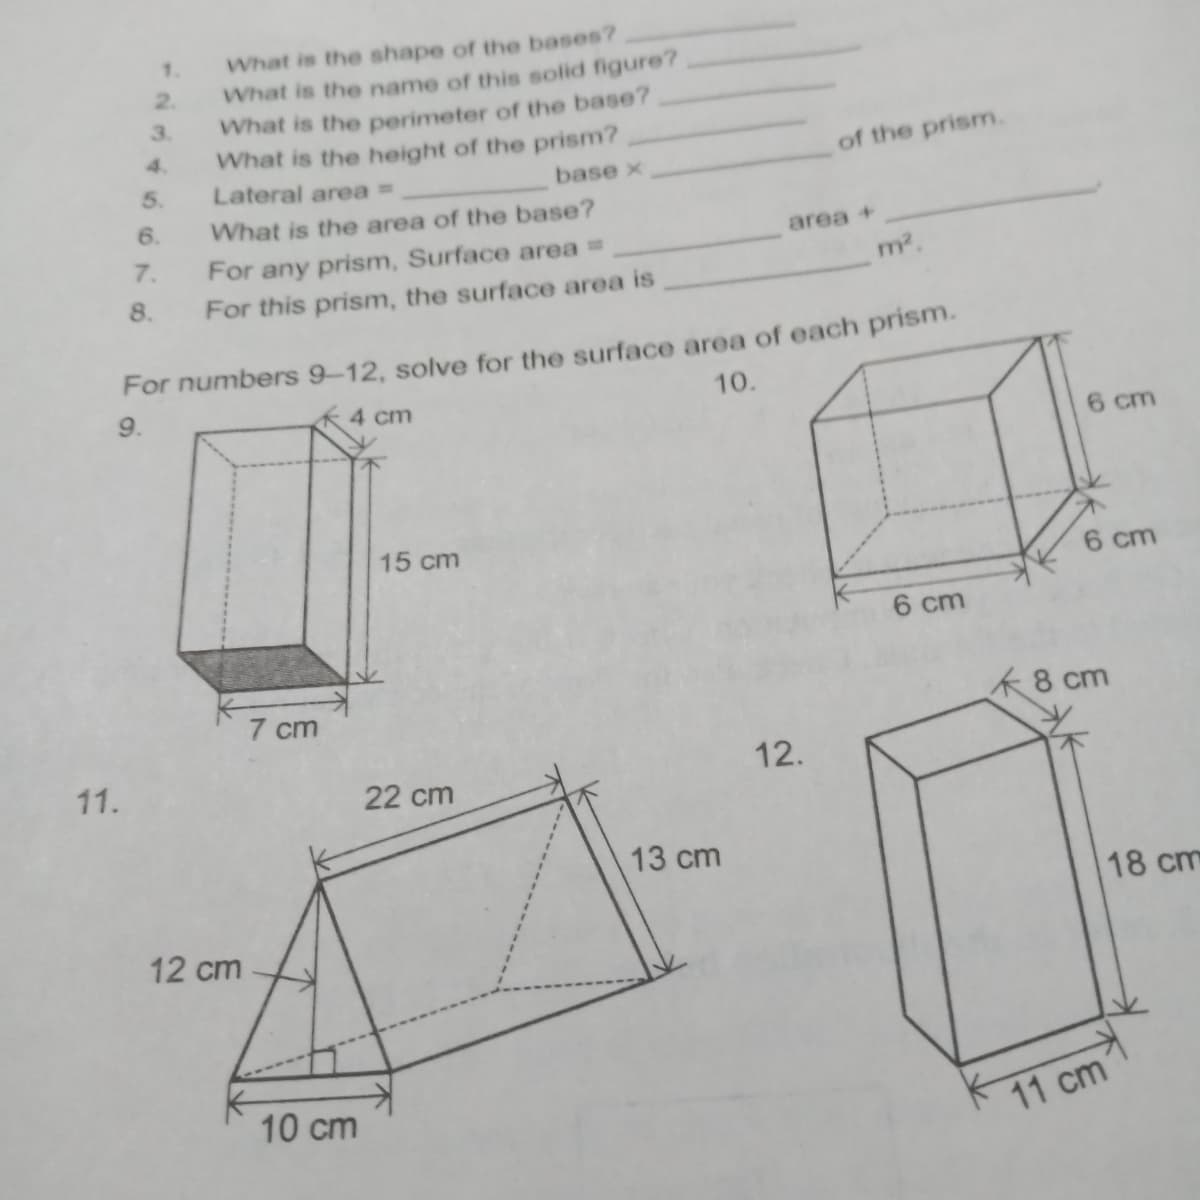 What is the shape of the bases?
What is the name of this solid figure?
What is the perimeter of the base?
What is the height of the prism?
Lateral areaD
1.
2.
3.
4.
of the prism.
base x
What is the area of the base?
area +
For any prism, Surface area =
For this prism, the surface area is
m2.
8.
For numbers 9-12, solve for the surface area of each prism.
9.
4 cm
10.
cm
15 cm
6 cm
6 cm
7 cm
K8 cm
11.
12.
22 cm
13 cm
18 cm
12 cm
10 cm
11 cm
5679
